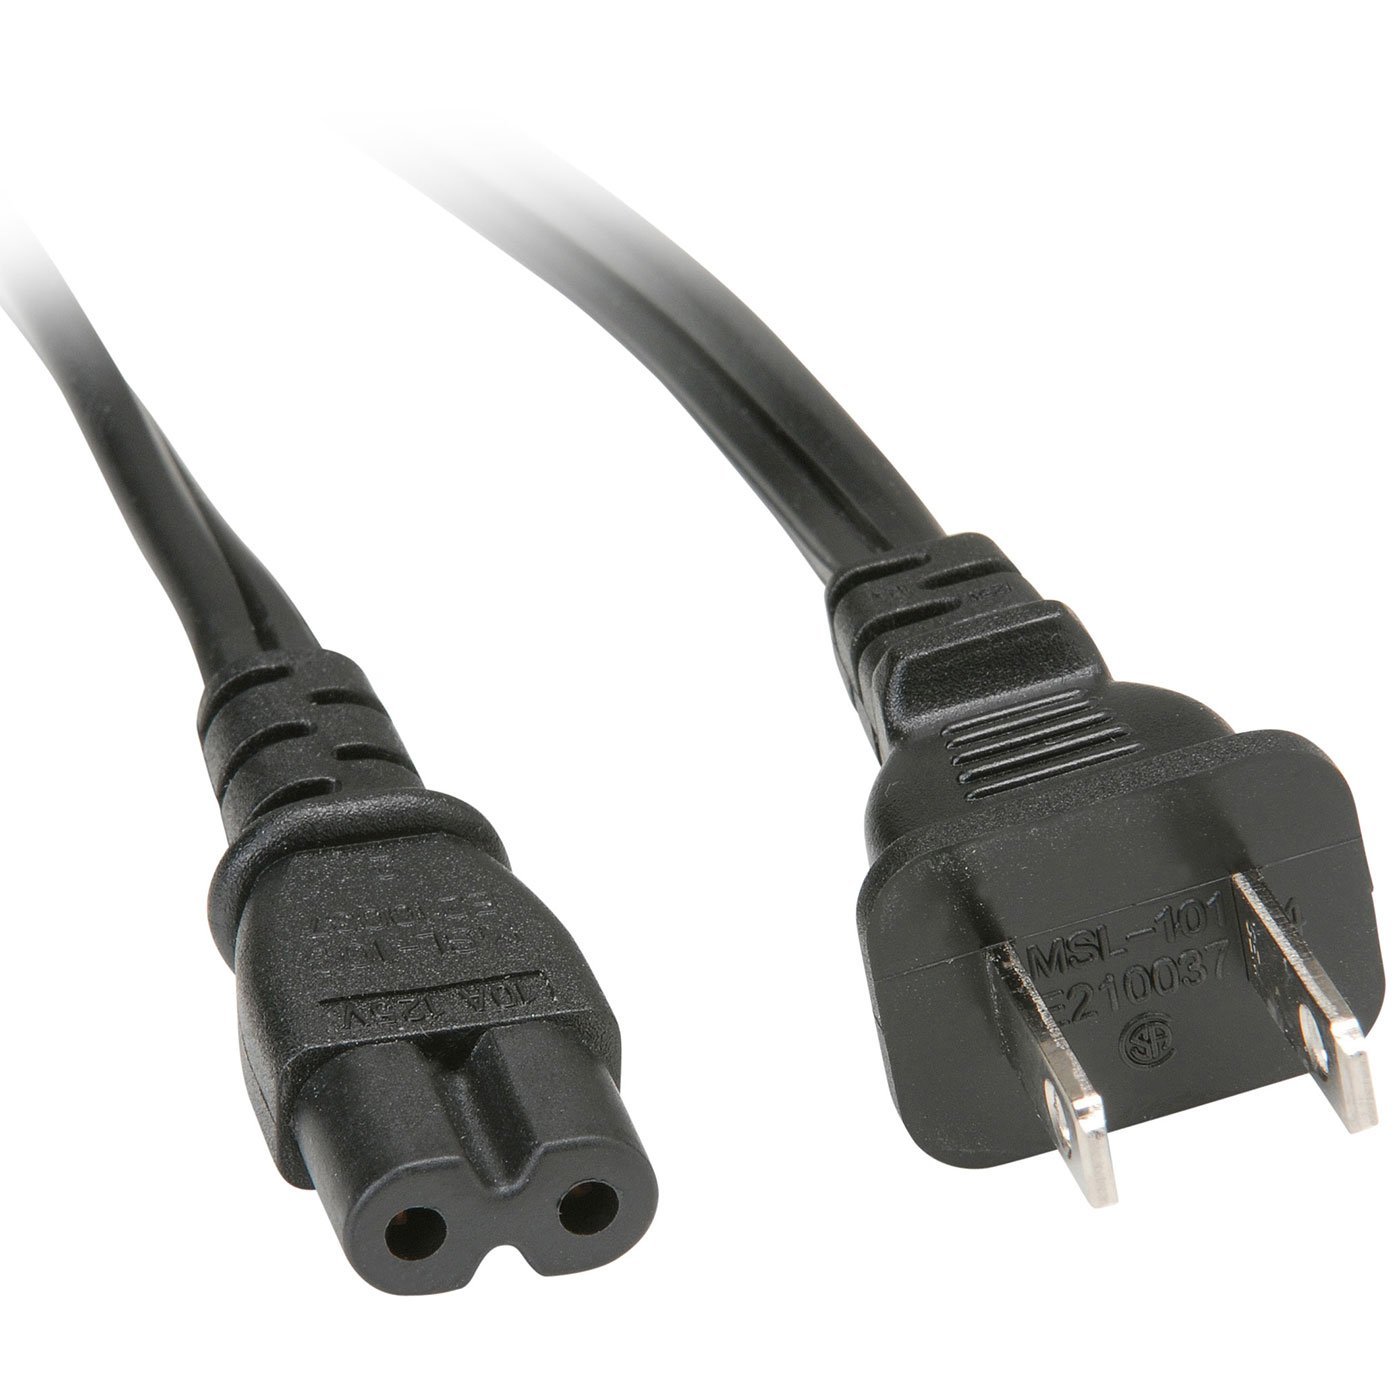 OMNIHIL AC Power Cord for Polk Audio AM6119 AM6119-A AM6119A Heritage Woodbourne Airplay Wireless Speaker - image 1 of 2